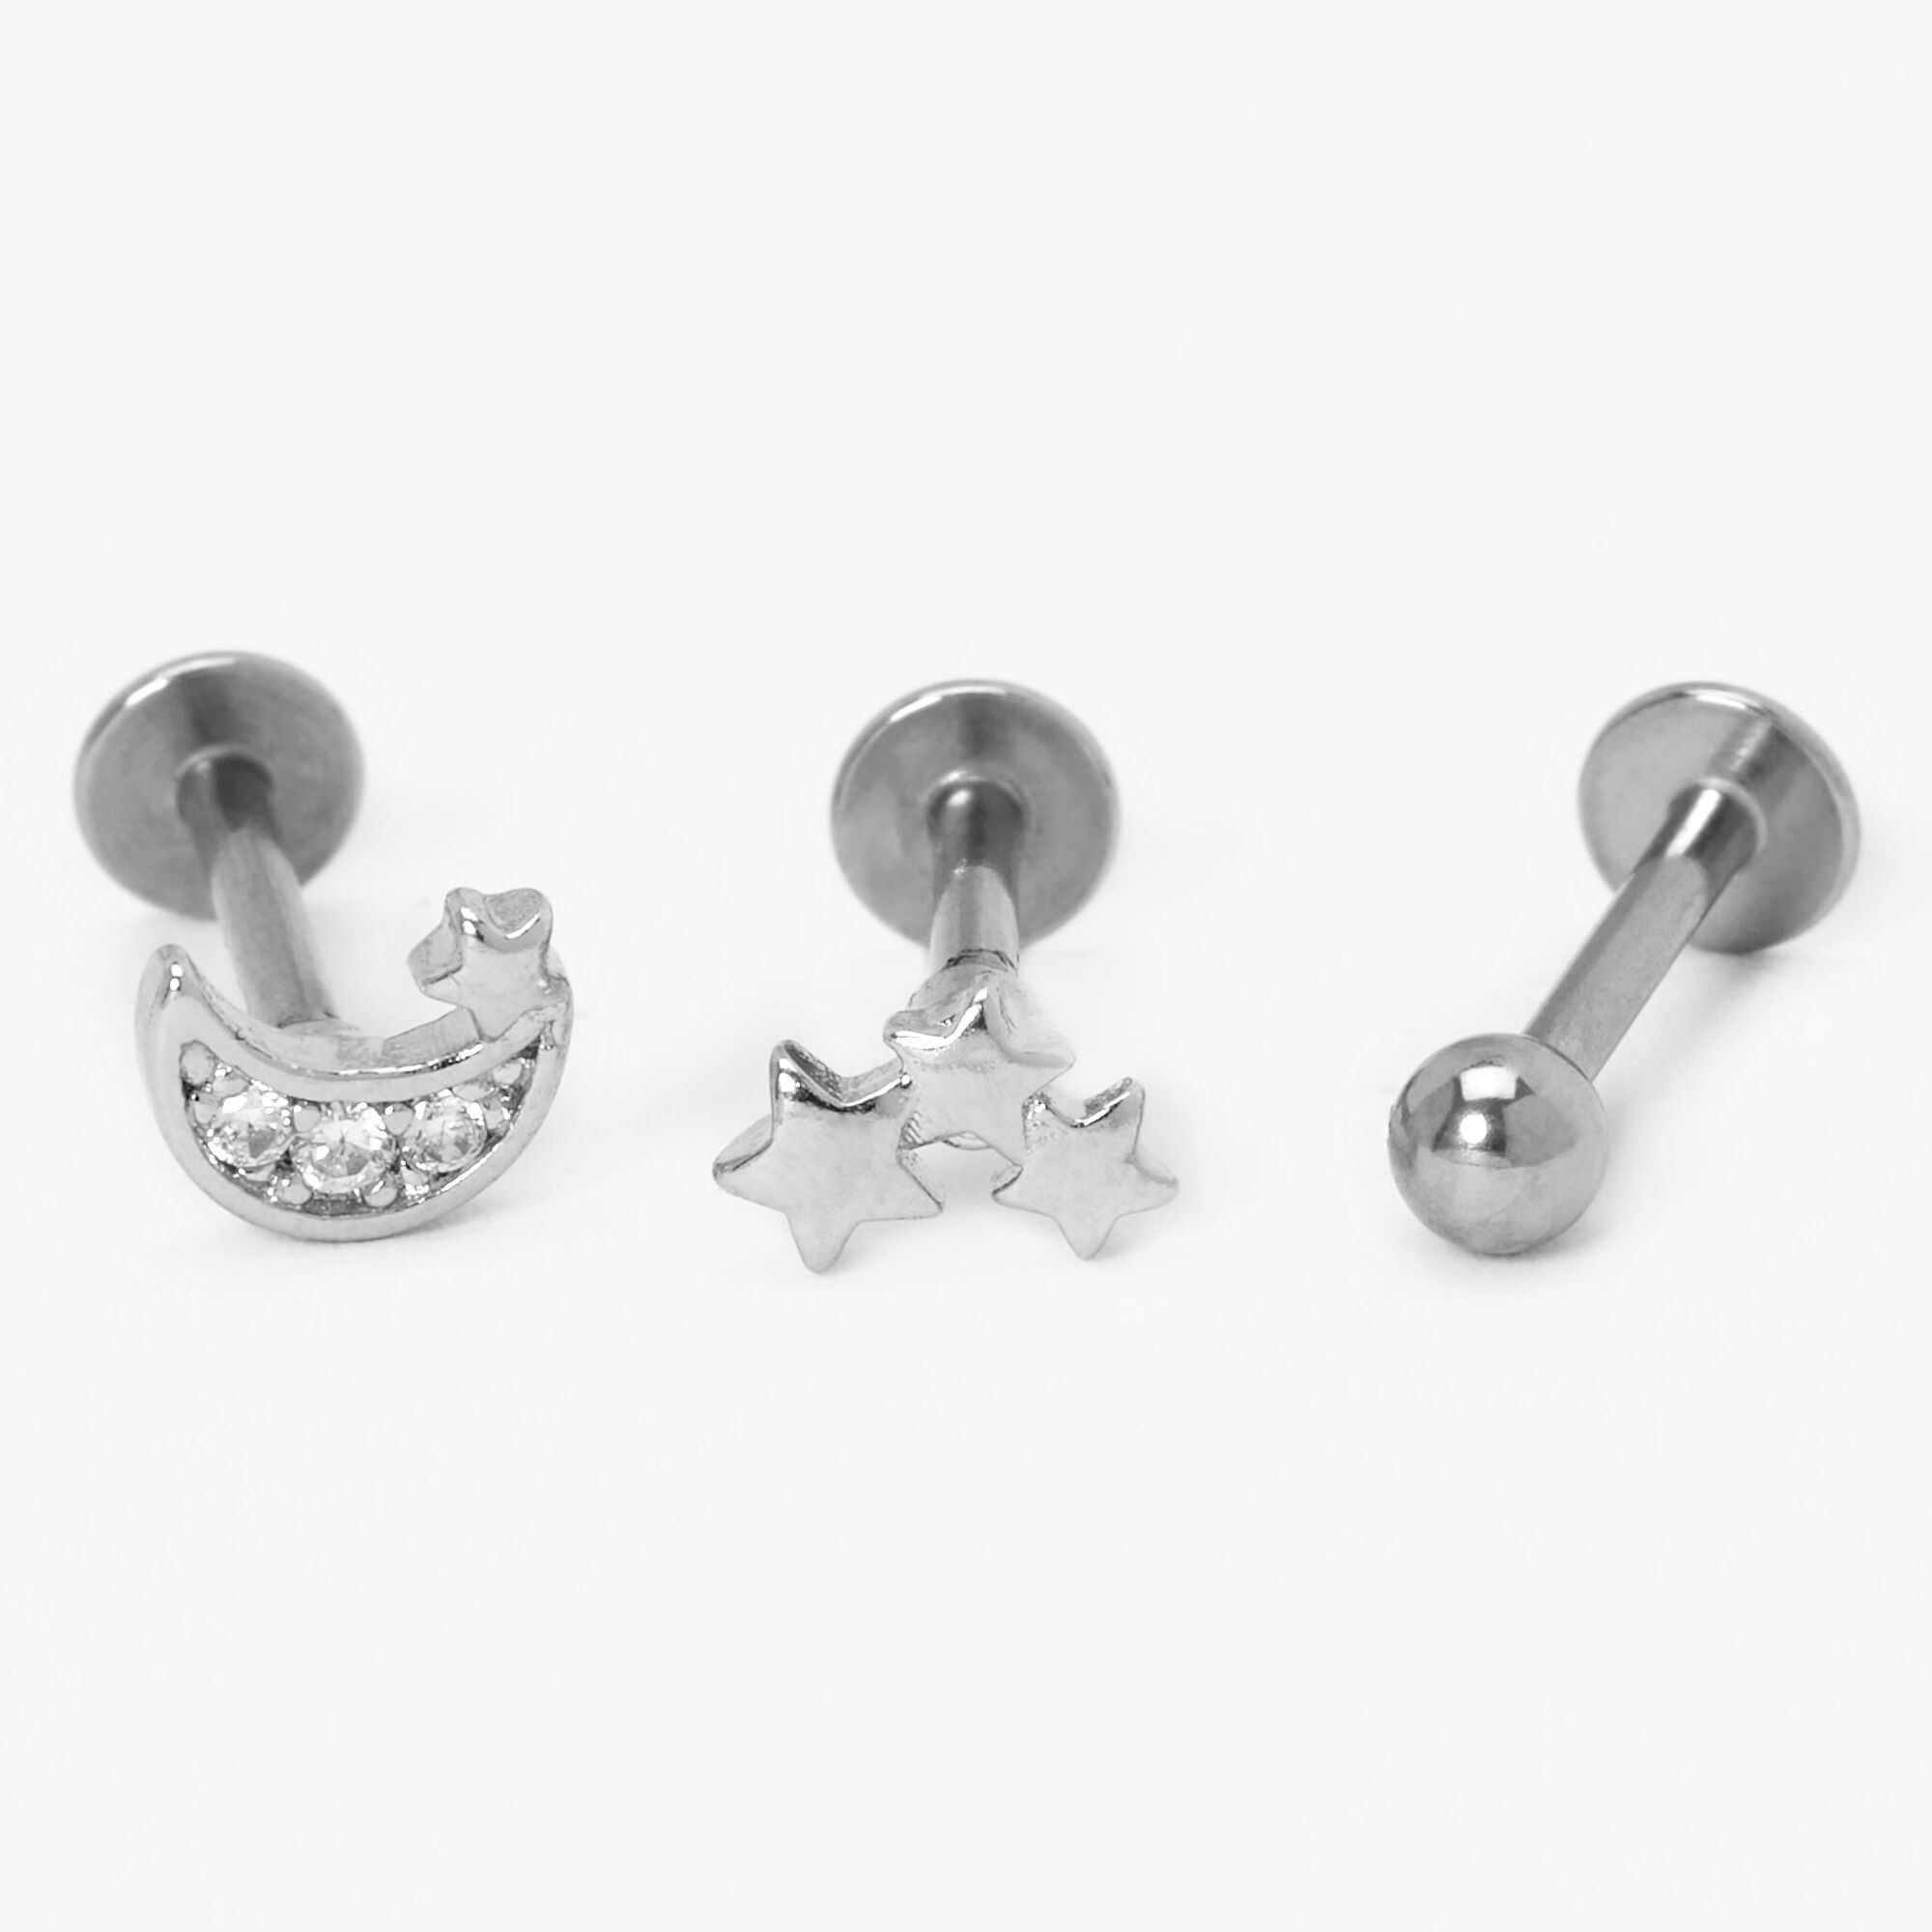 View Claires Tone Moon Star Tragus Stud Earrings 3 Pack Silver information